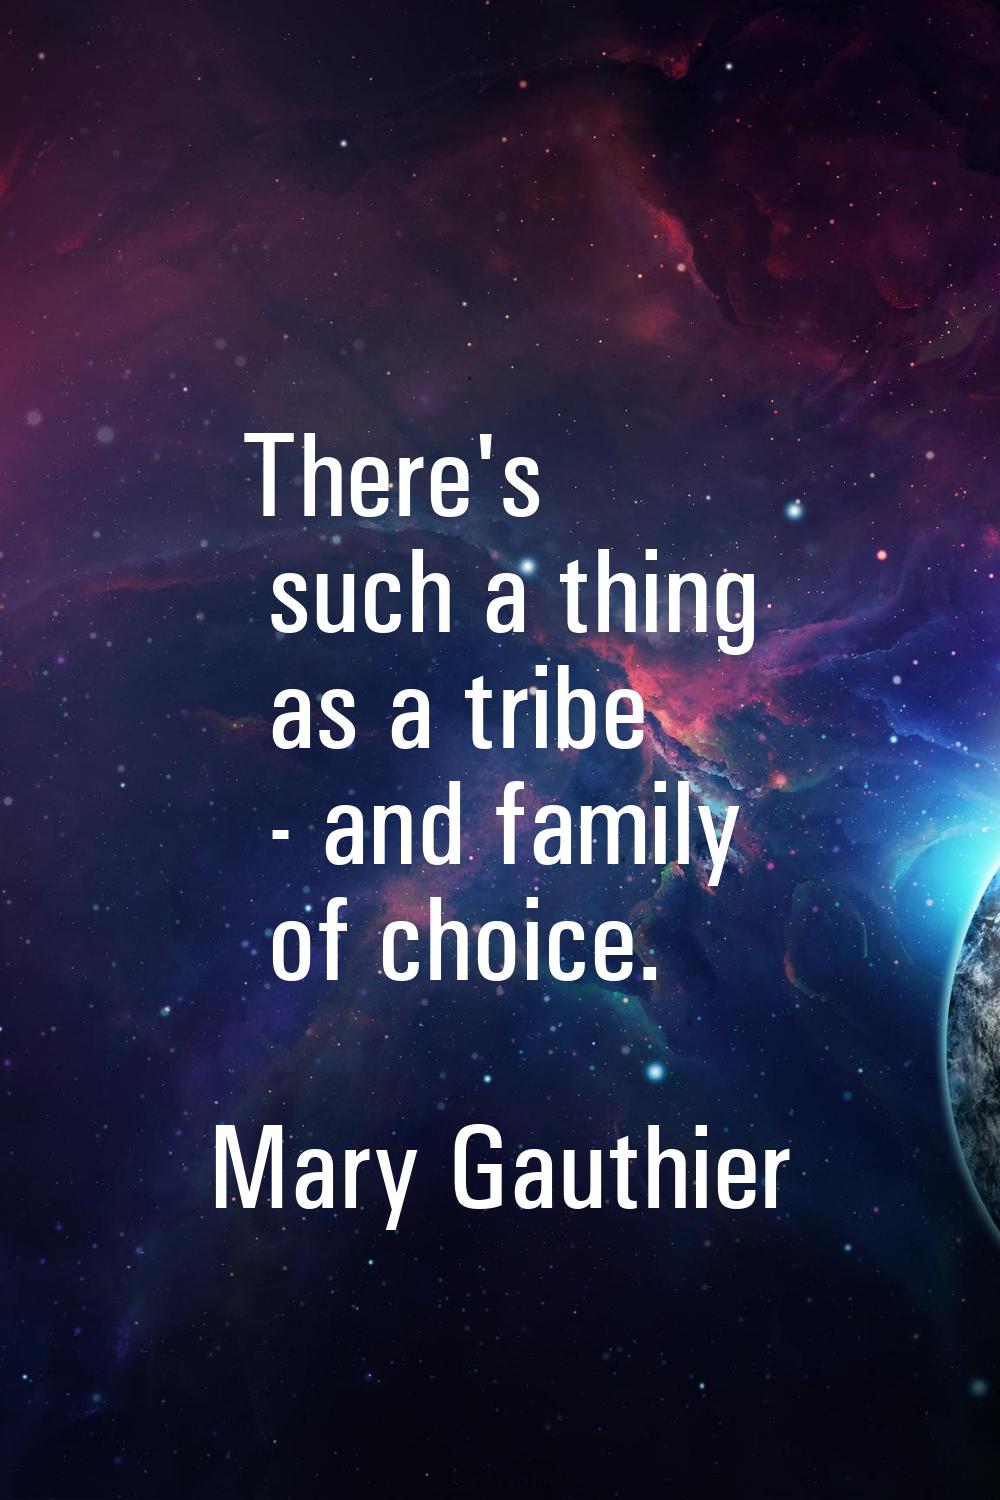 There's such a thing as a tribe - and family of choice.